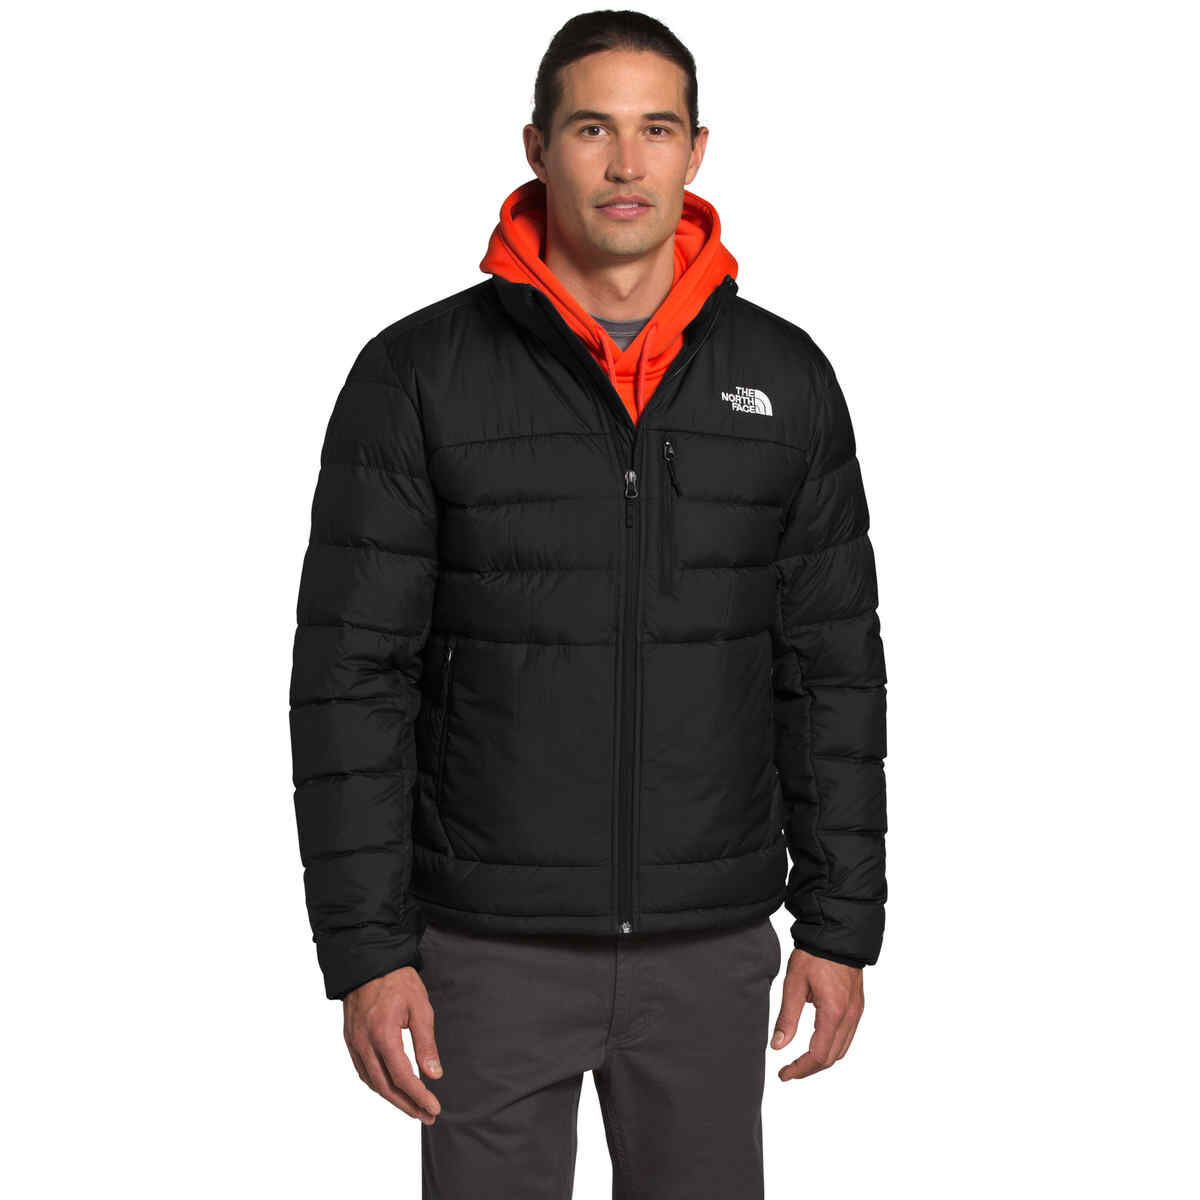 Buy The North Face Men's Aconcagua Jacket by The North Face